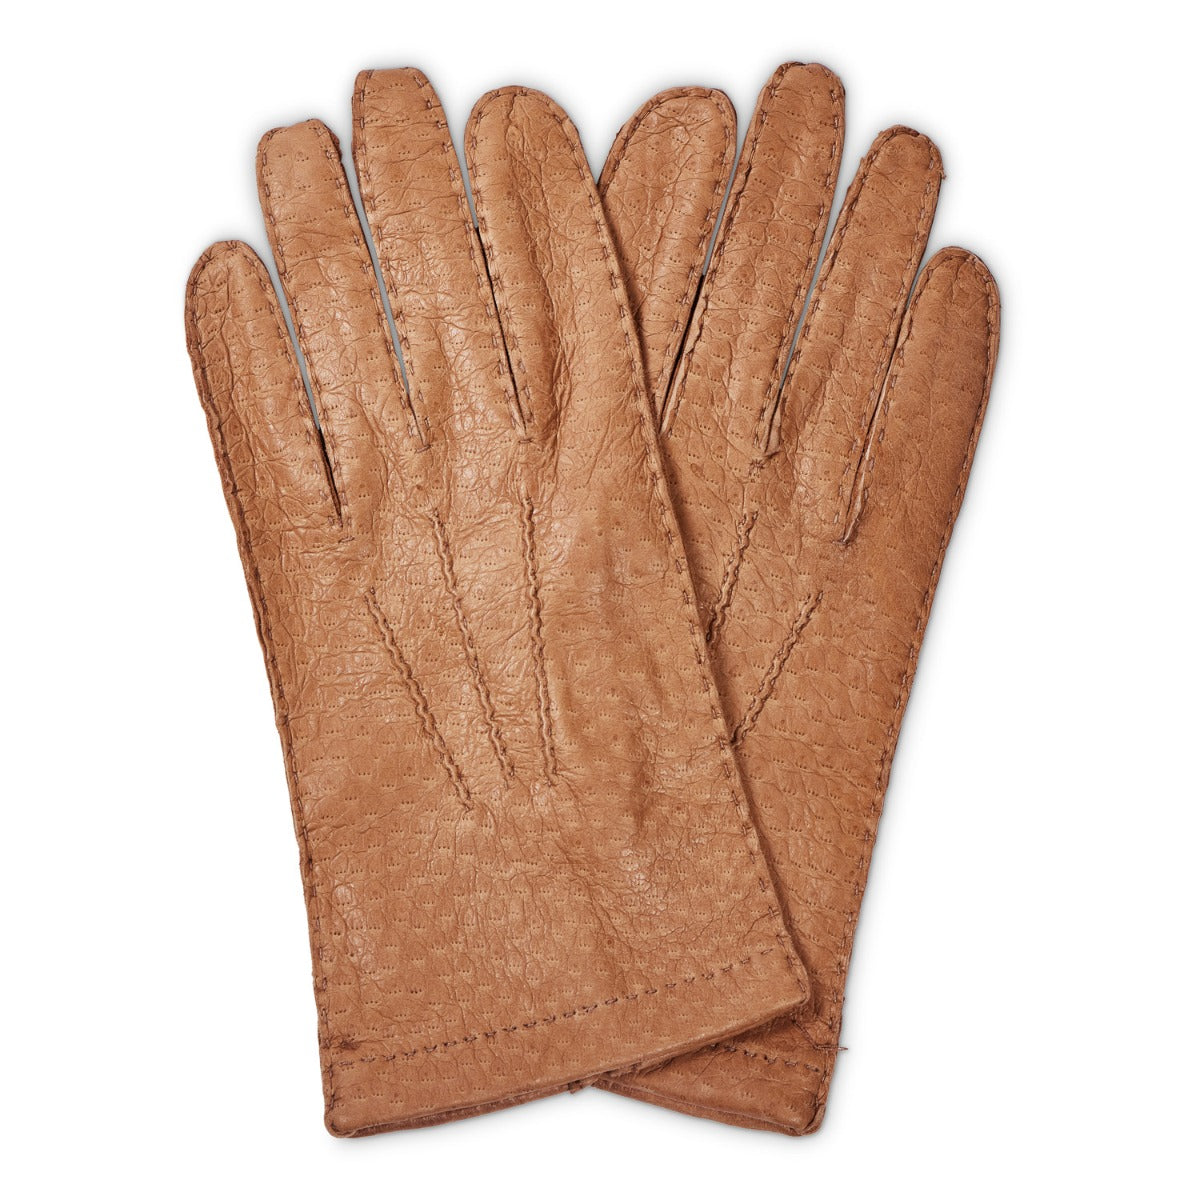 Anteia - Peccary Leather Gloves Light Brown / 6